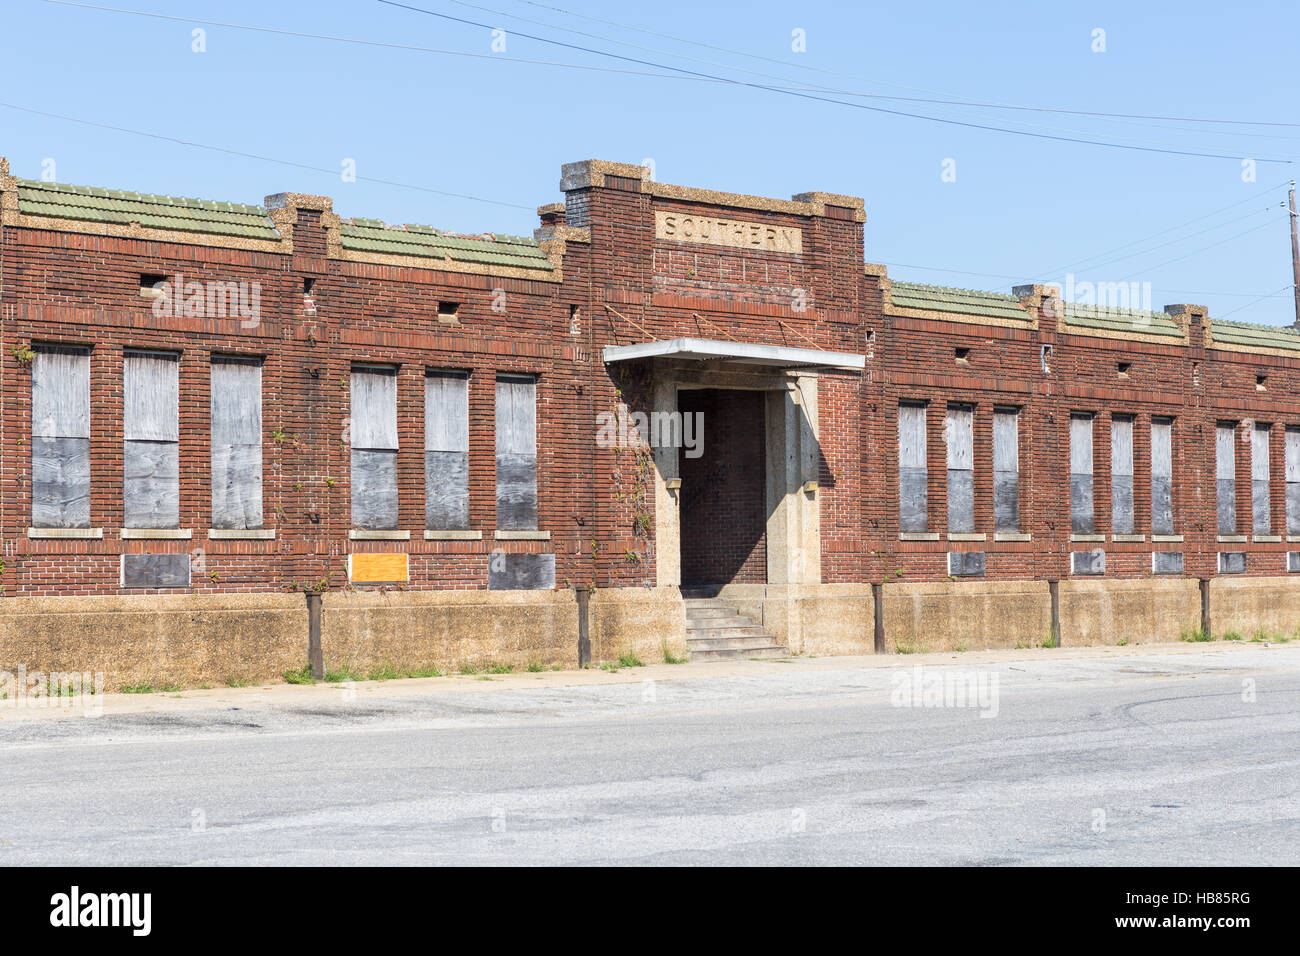 An abandoned Southern Railway Freight Depot in Mobile, Alabama. Stock Photo